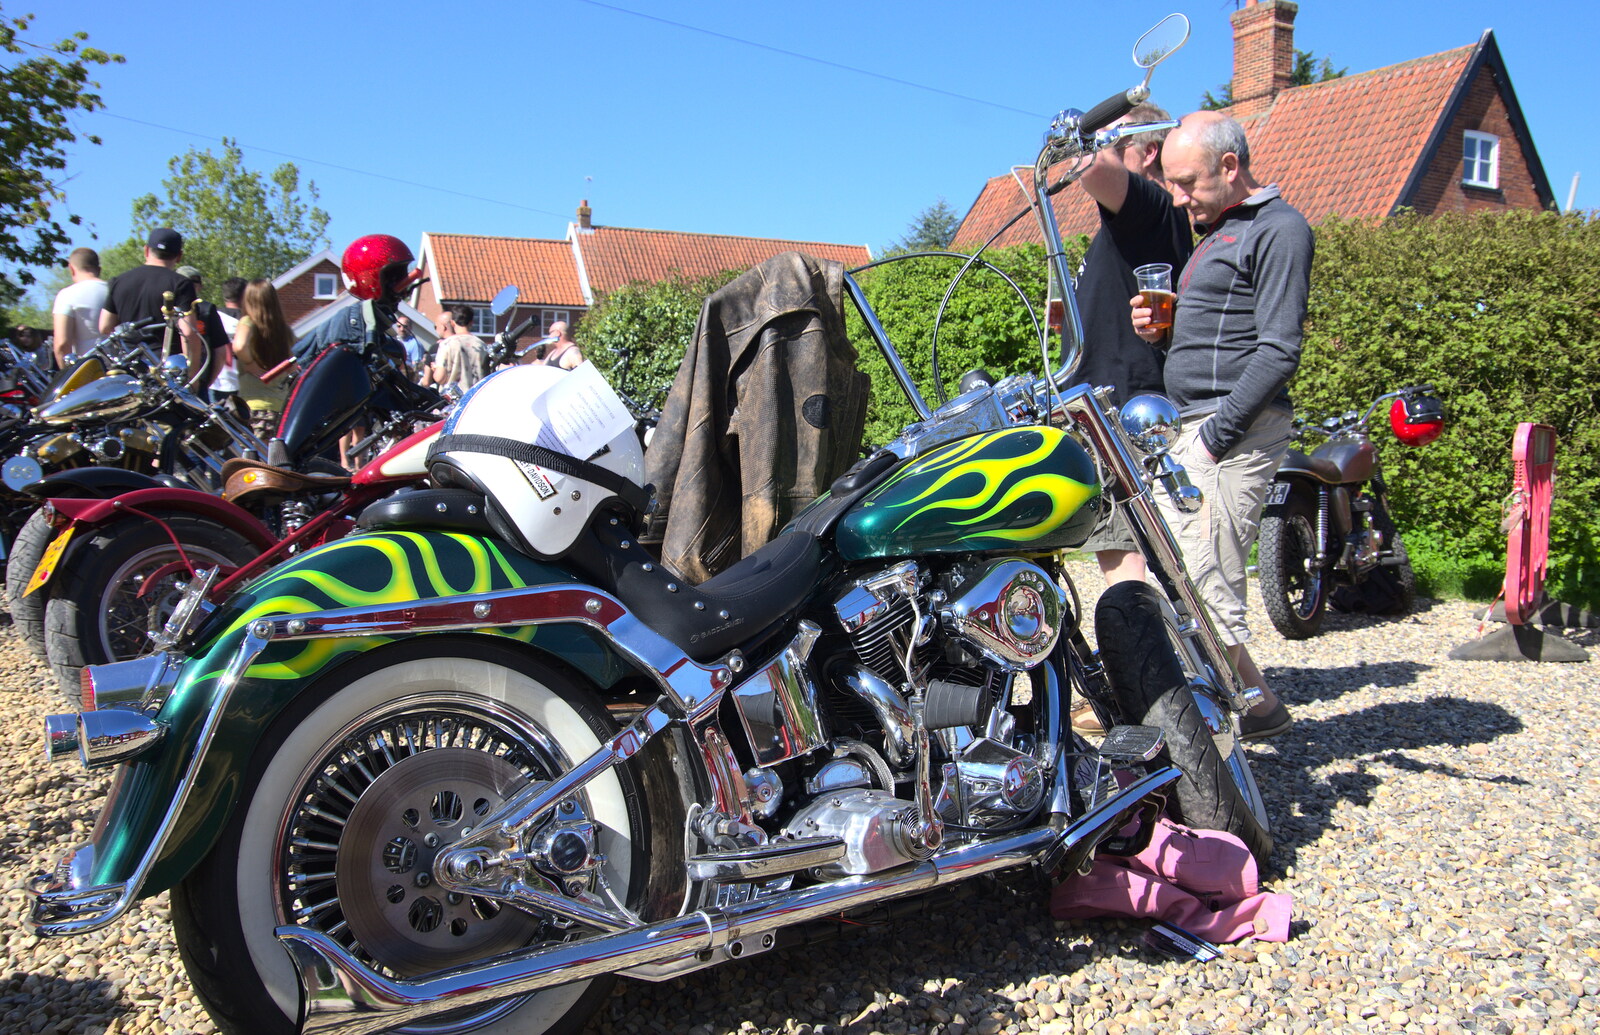 DH inspects a bike from Beer, Bikes and Bands, Burston Crown, Burston, Norfolk - 6th May 2018